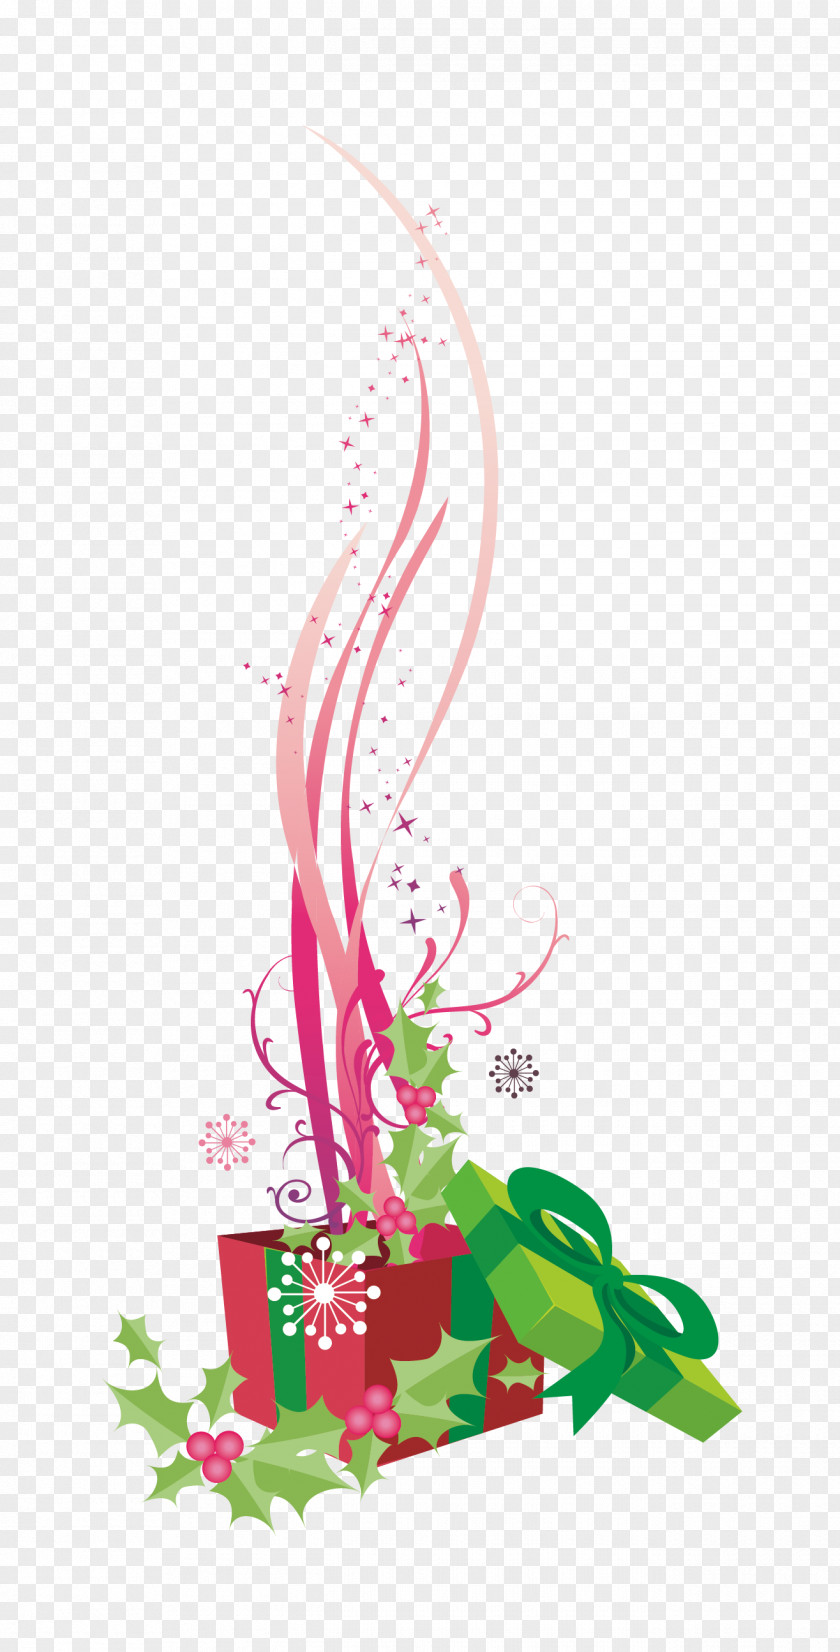 Gifts Flowers Gift Santa Claus Christmas Euclidean Vector PNG